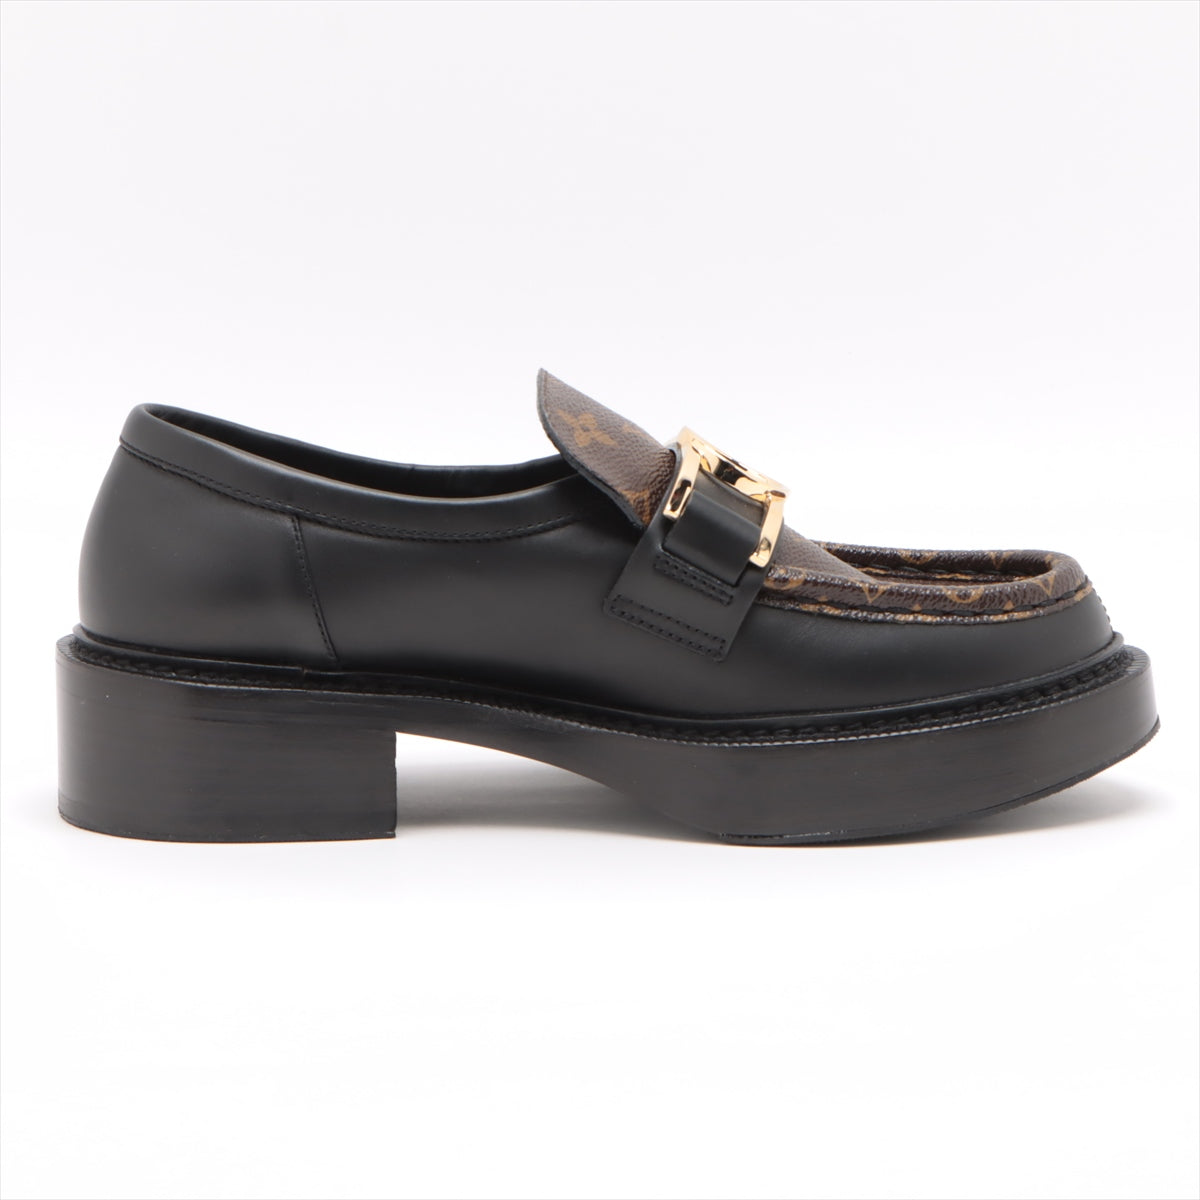 Louis Vuitton Academy Line 20 years Leather Loafer 38 Ladies' Black × Brown MA0230 Monogram